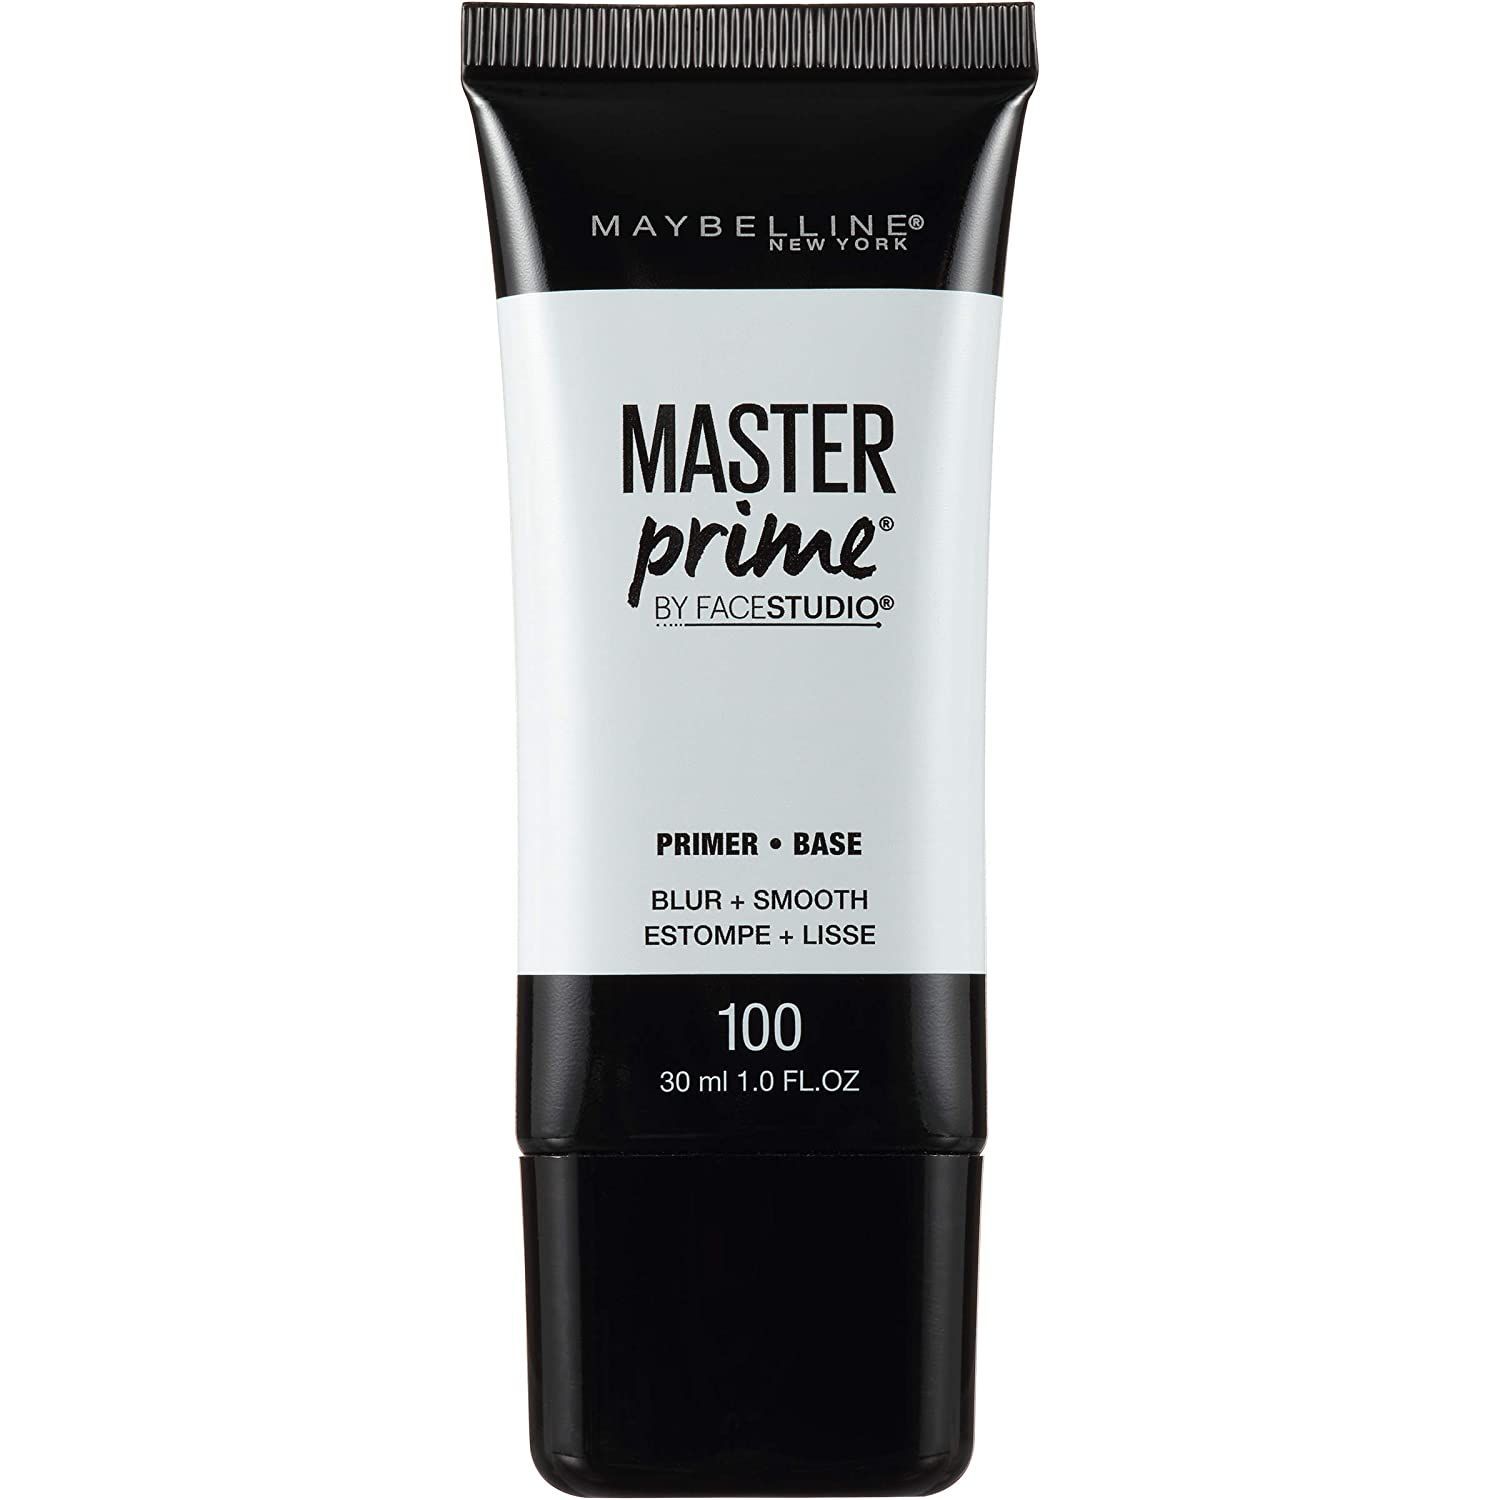 13 Best Drugstore Primers Of 2022 - Makeup Primers For All Skin Types